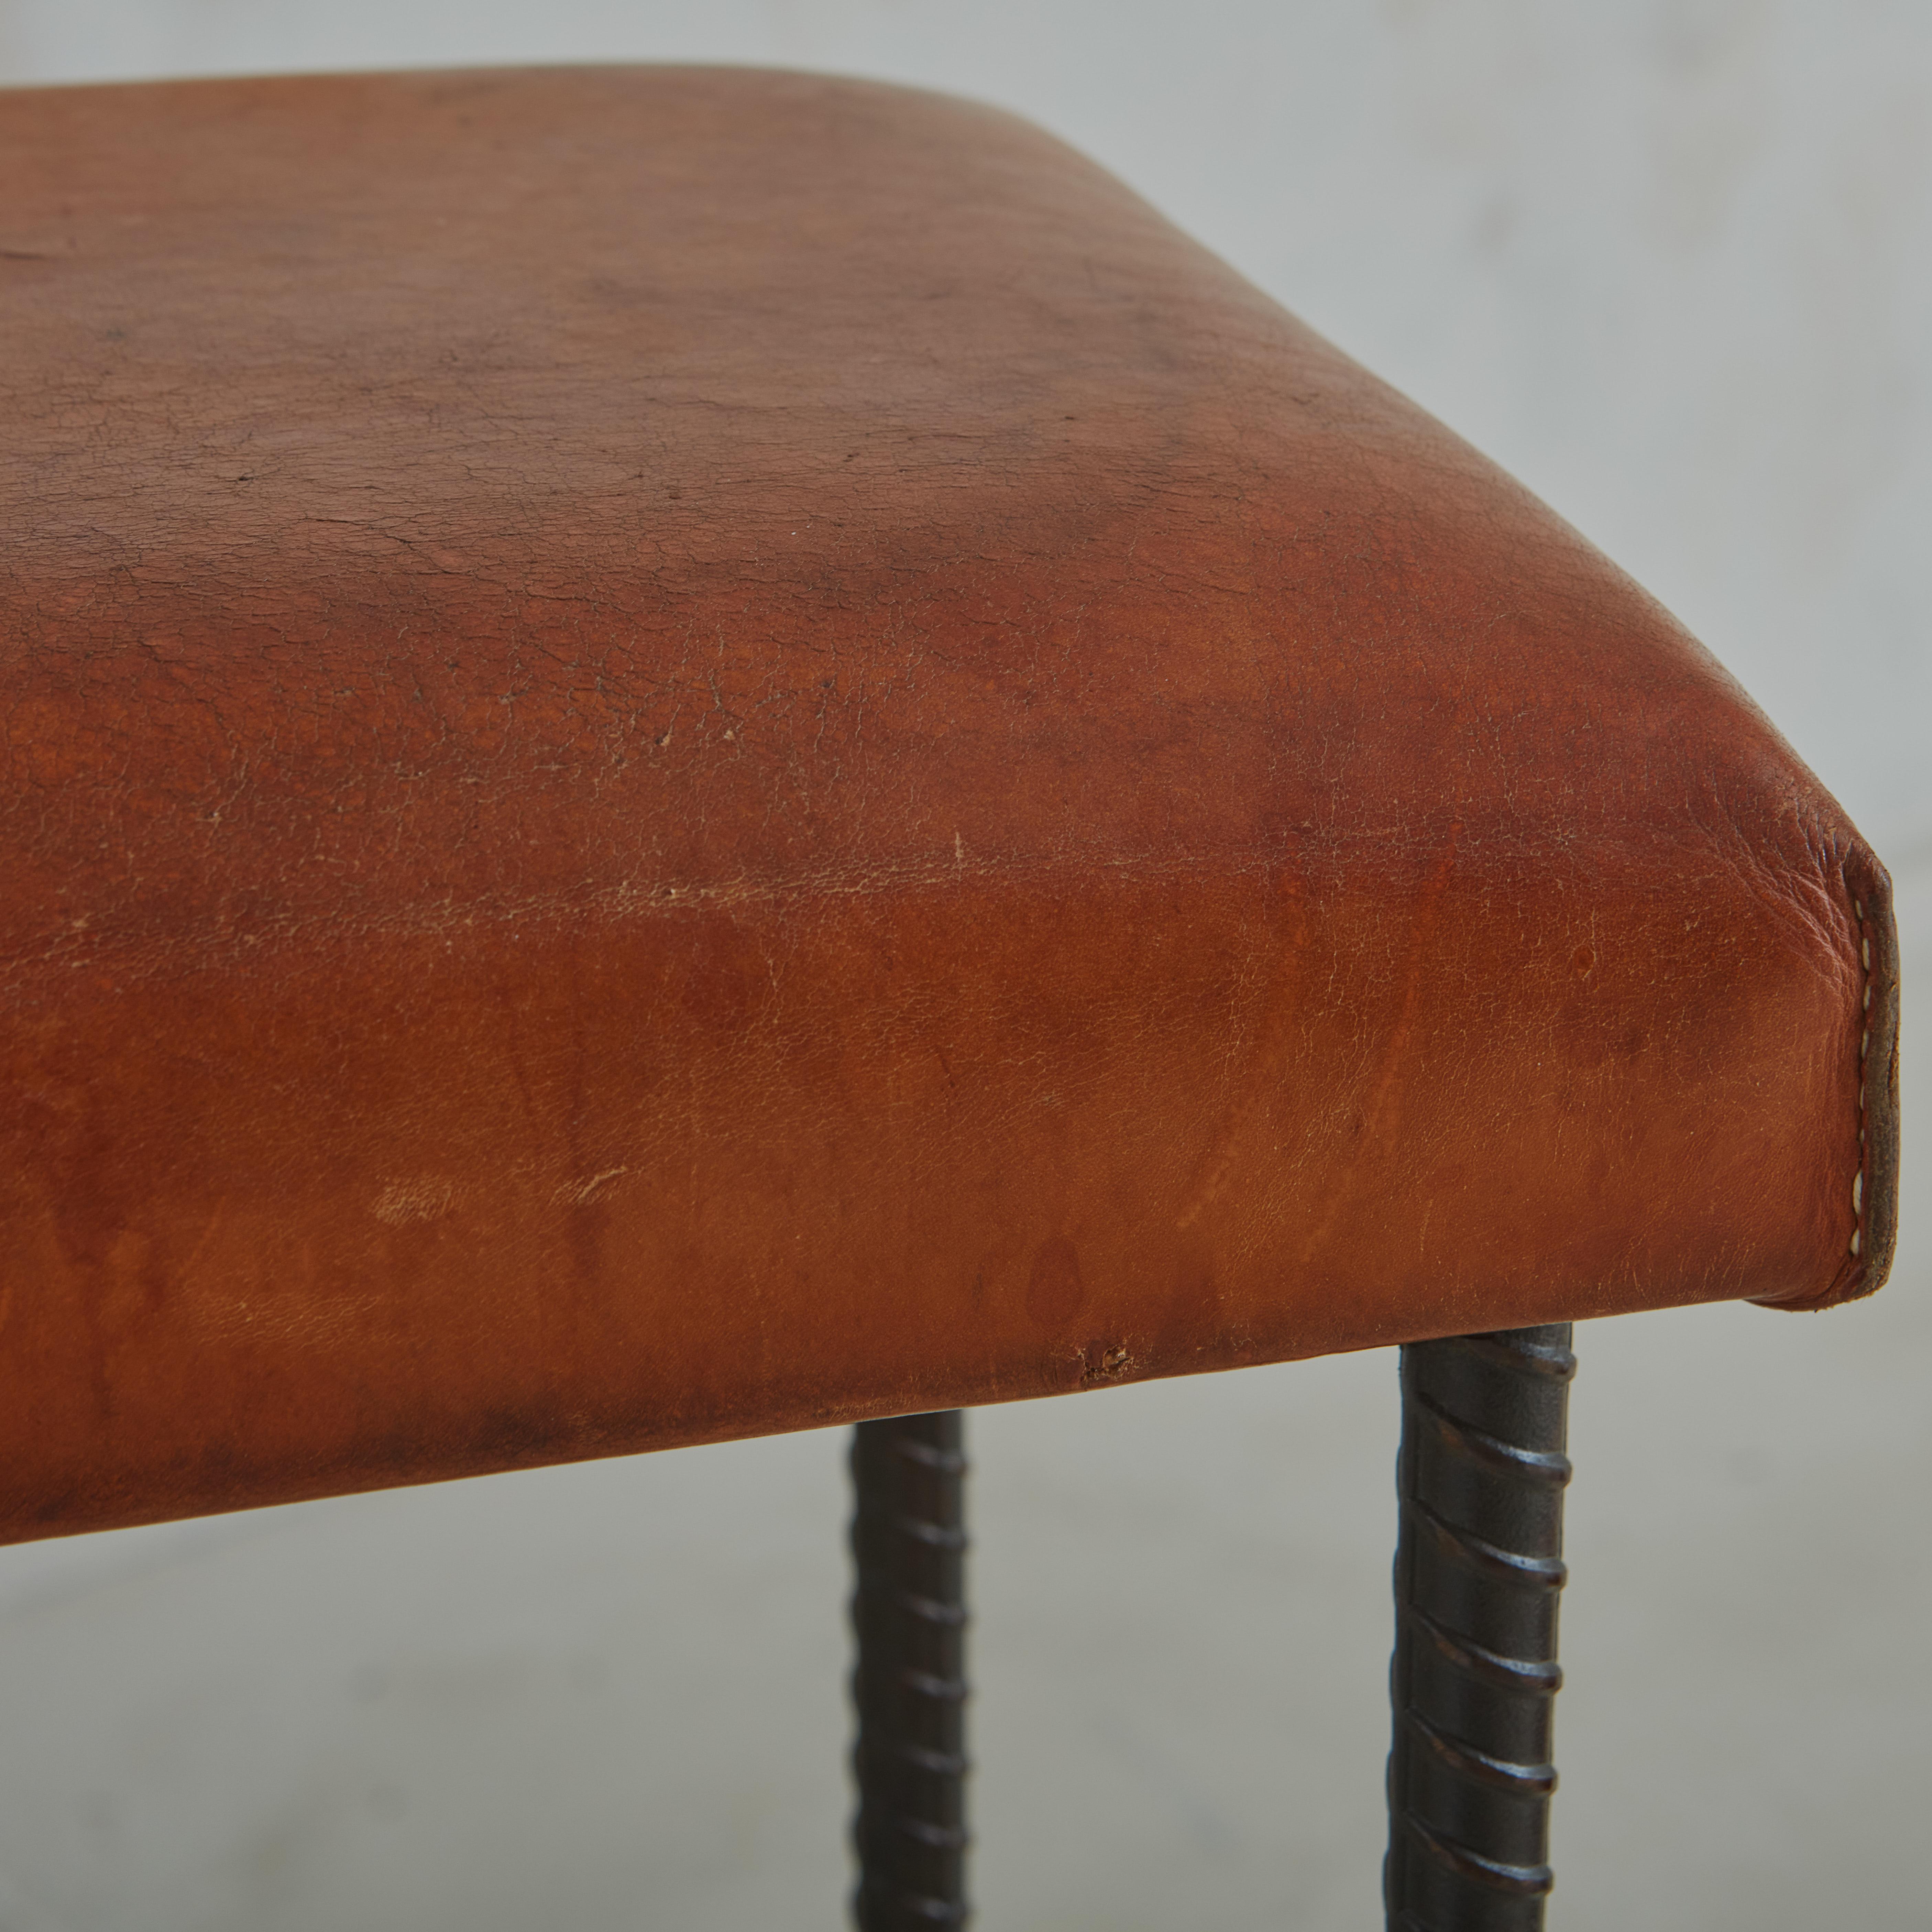 Brutalist Forged Iron + Cognac Leather Stool, France 1960s For Sale 4